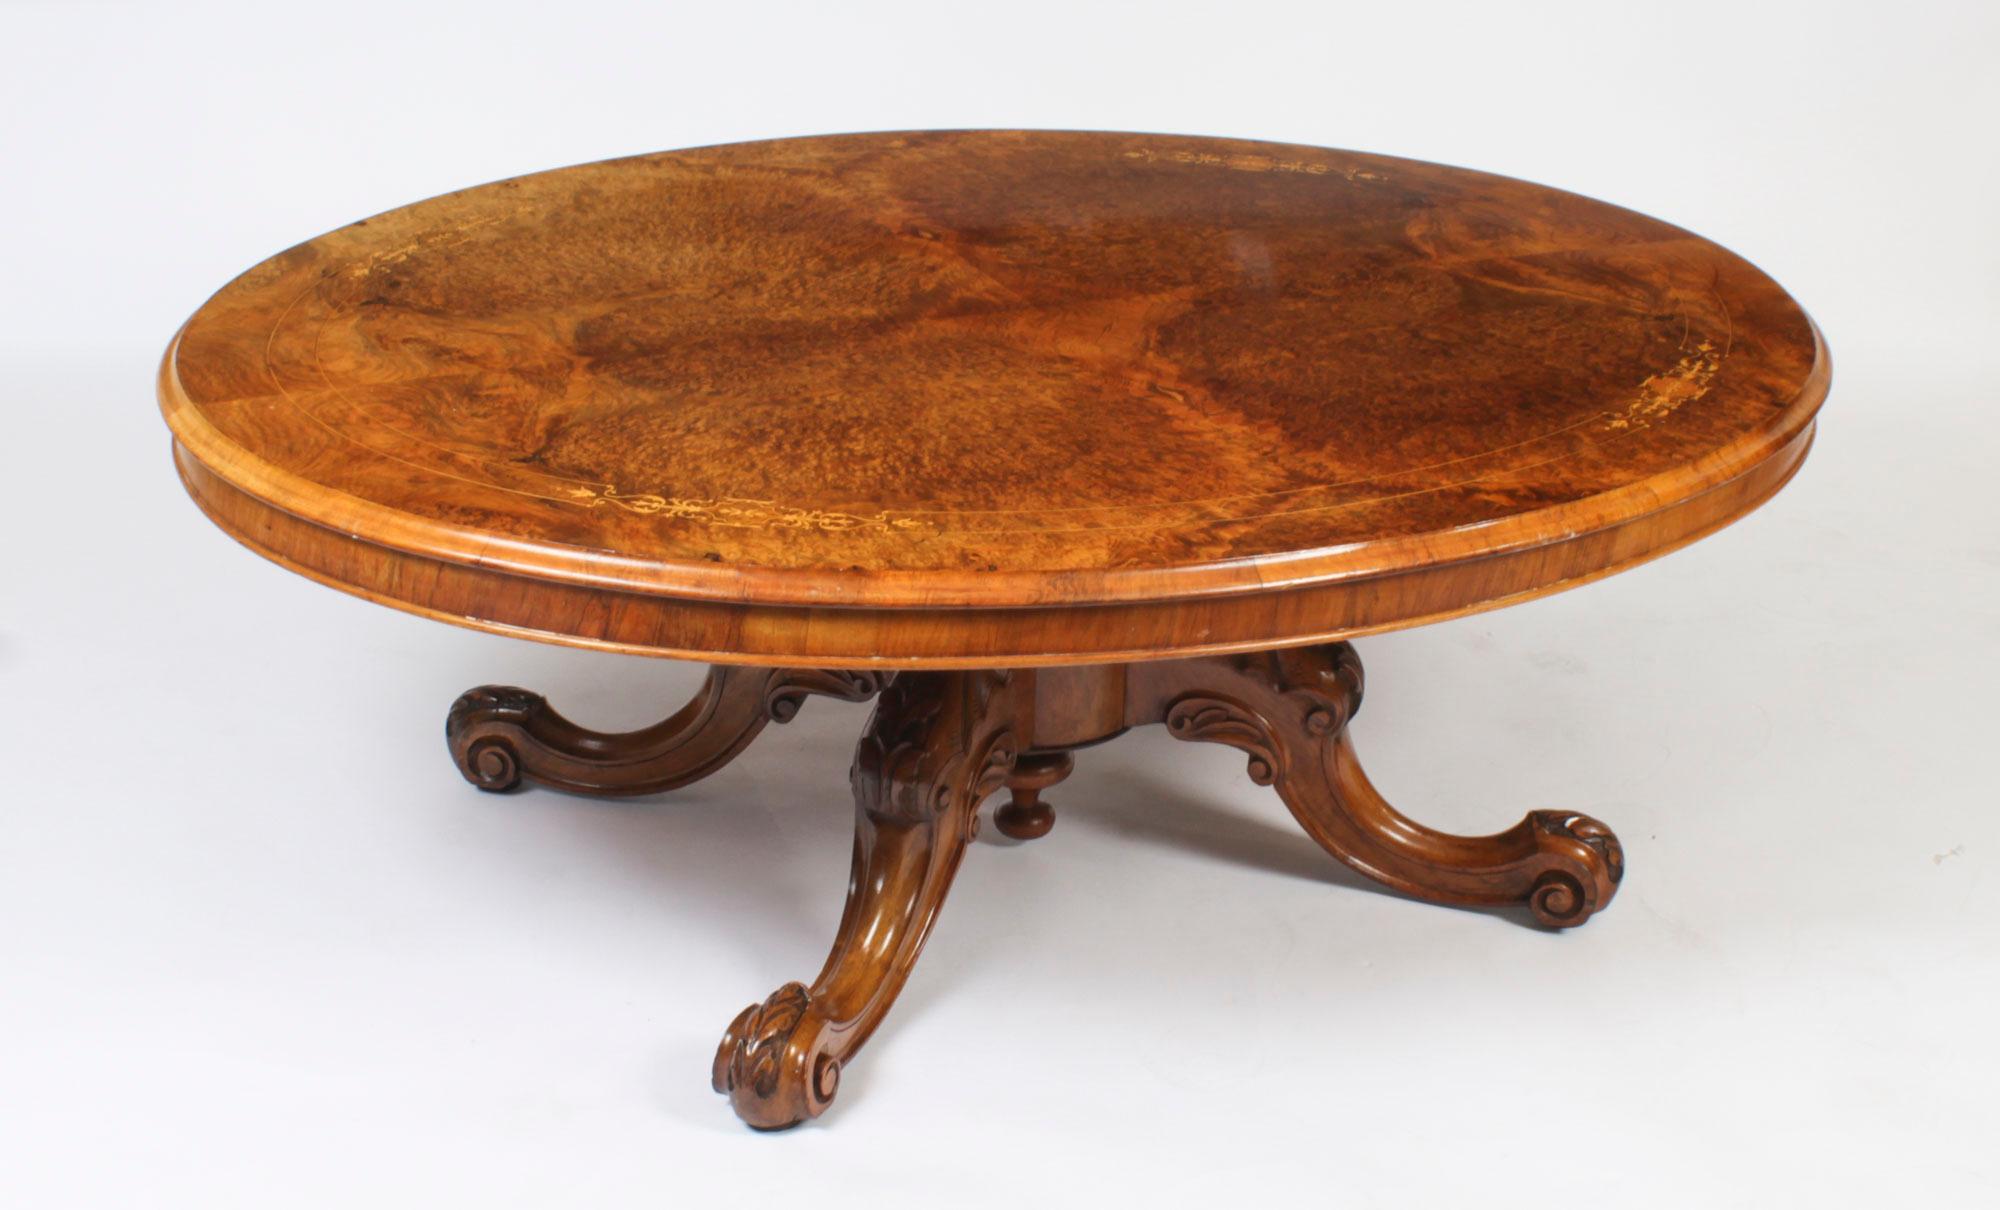 Antique Burr Walnut & Marquetry Oval Coffee Table Circa 19th Century For Sale 10